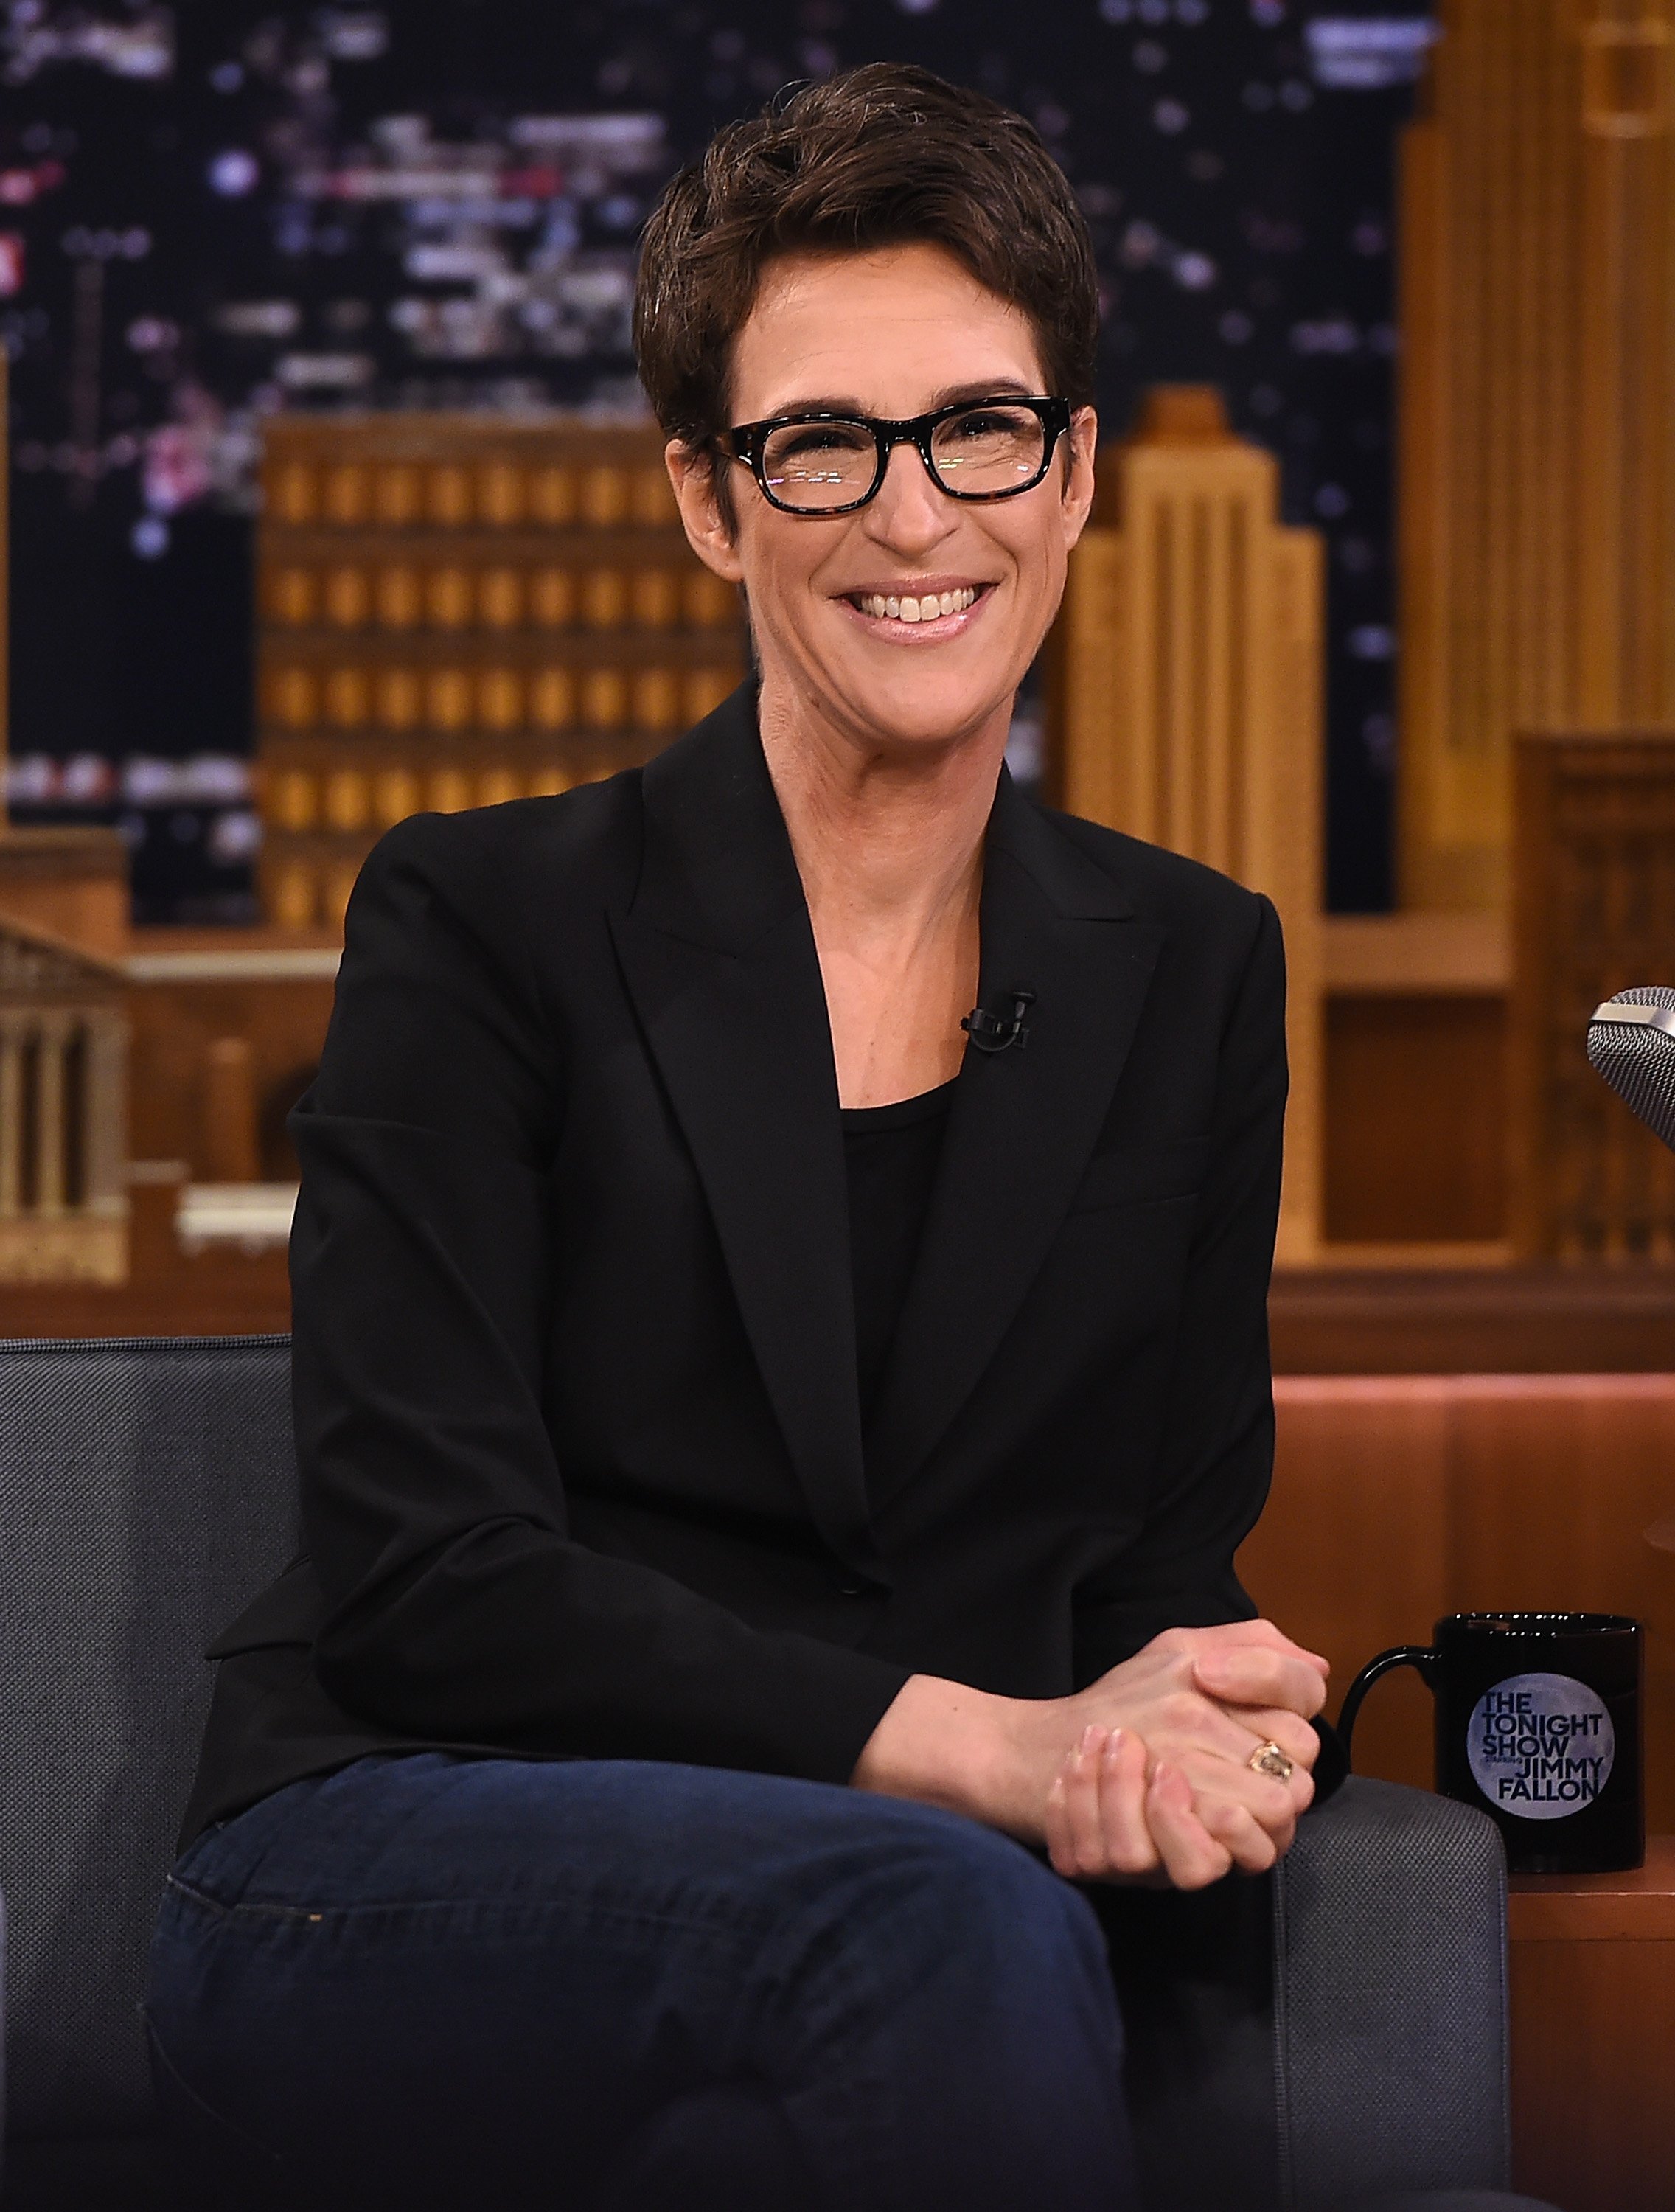 NEW YORK, NY - MARCH 15: Rachel Maddow Visits "The Tonight Show Starring Jimmy Fallon" at Rockefeller Center on March 15, 2017 in New York City. (Photo by Theo Wargo/Getty Images for NBC)